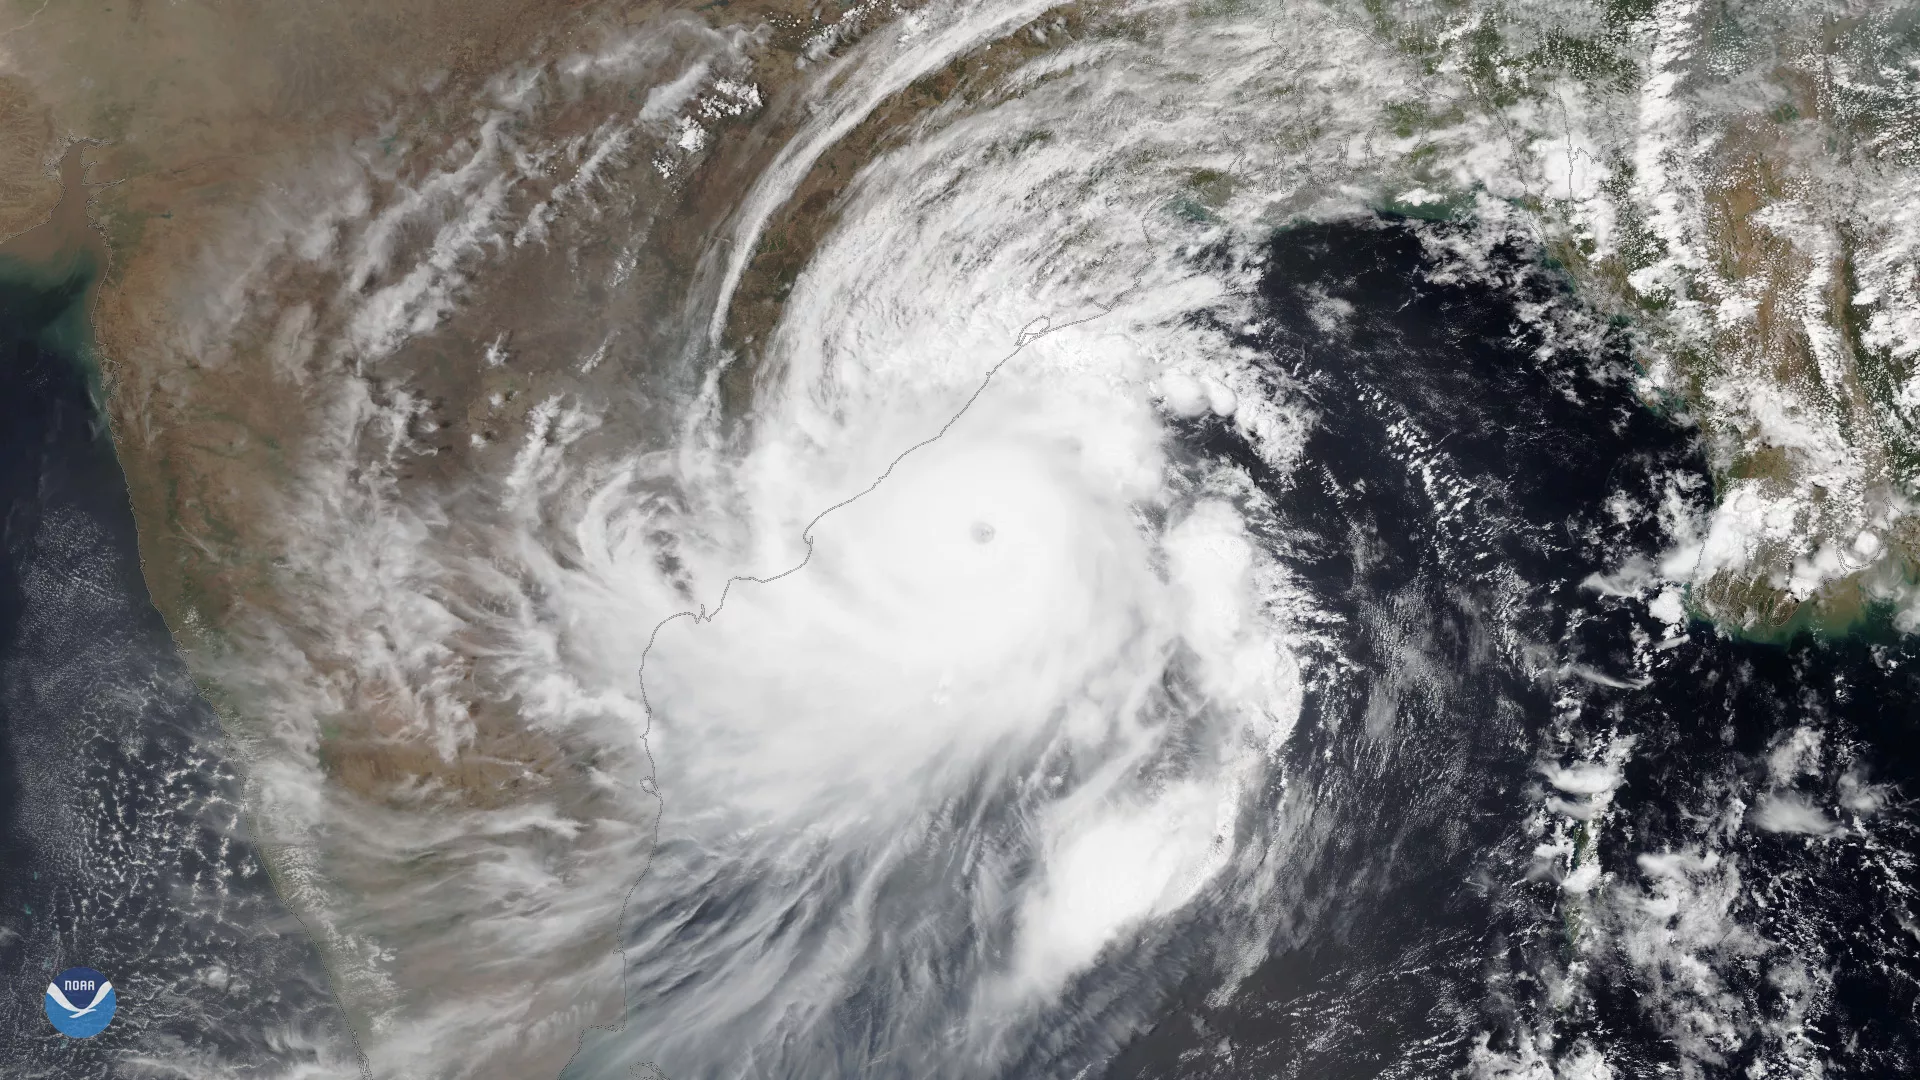 On May 2, NOAA-20 captured this imagery of Cyclone Fani before it made landfall in India's Odisha state.